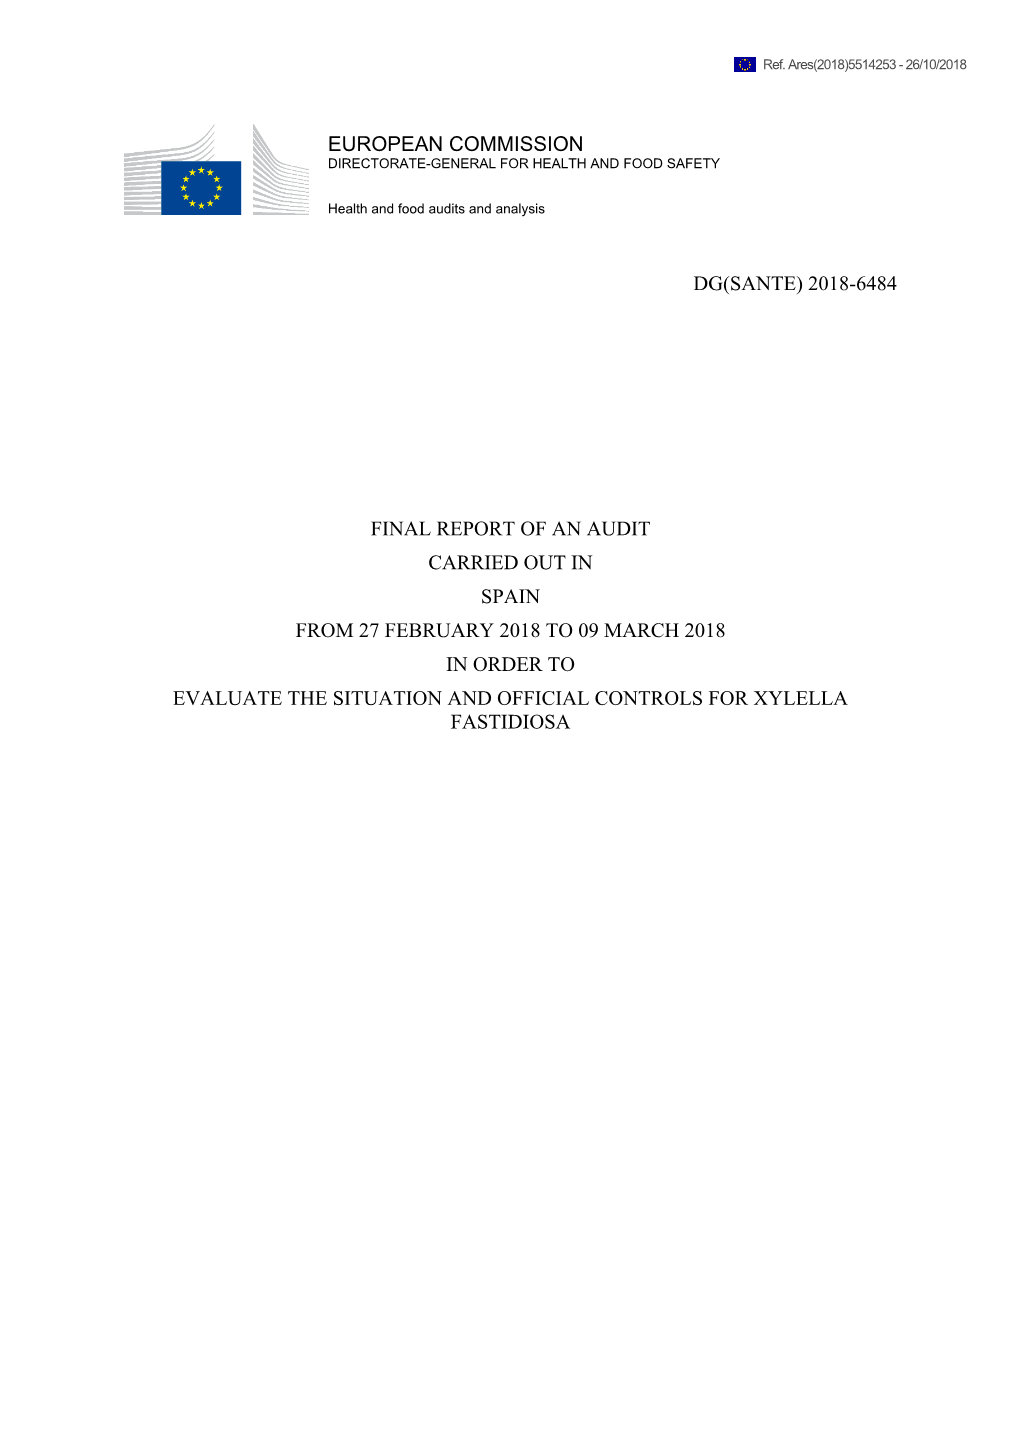 European Commission Dg(Sante) 2018-6484 Final Report of an Audit Carried out in Spain from 27 February 2018 to 09 March 2018 In